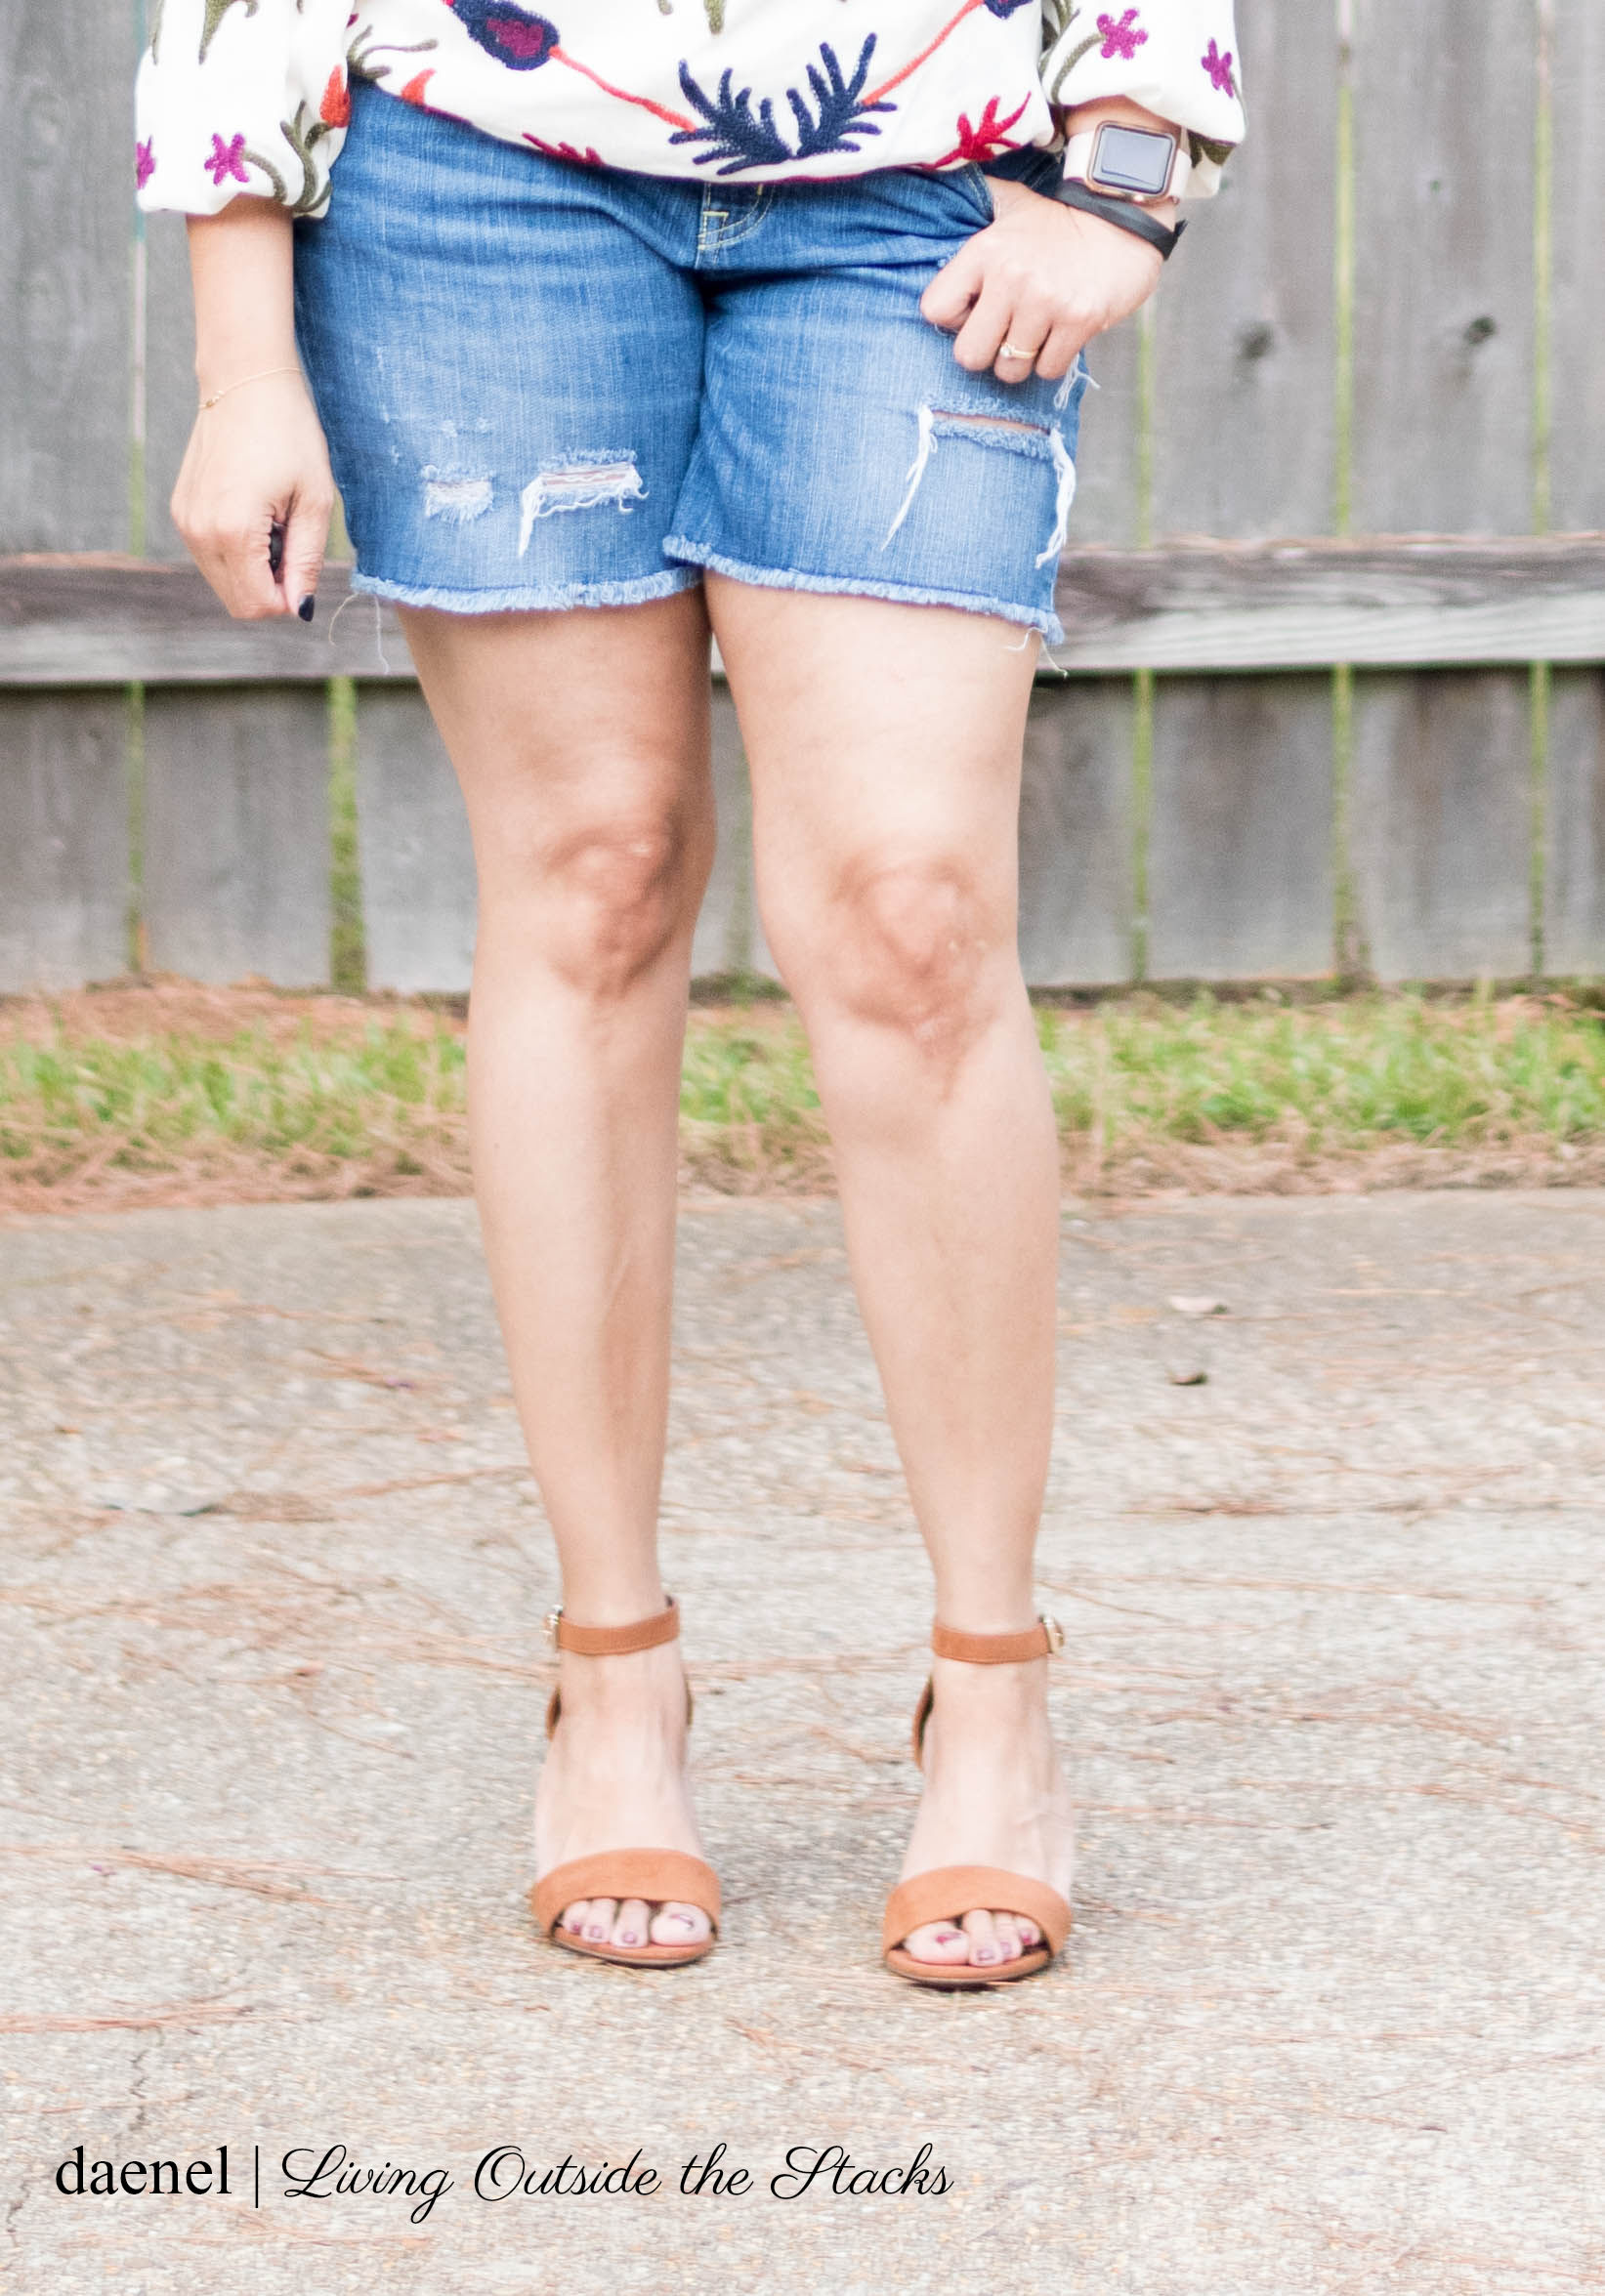  Embroidered Boho Top by Laurie Felt Distressed Denim Shorts from Target and Camel Sandals from Zulily {living outside the stacks}